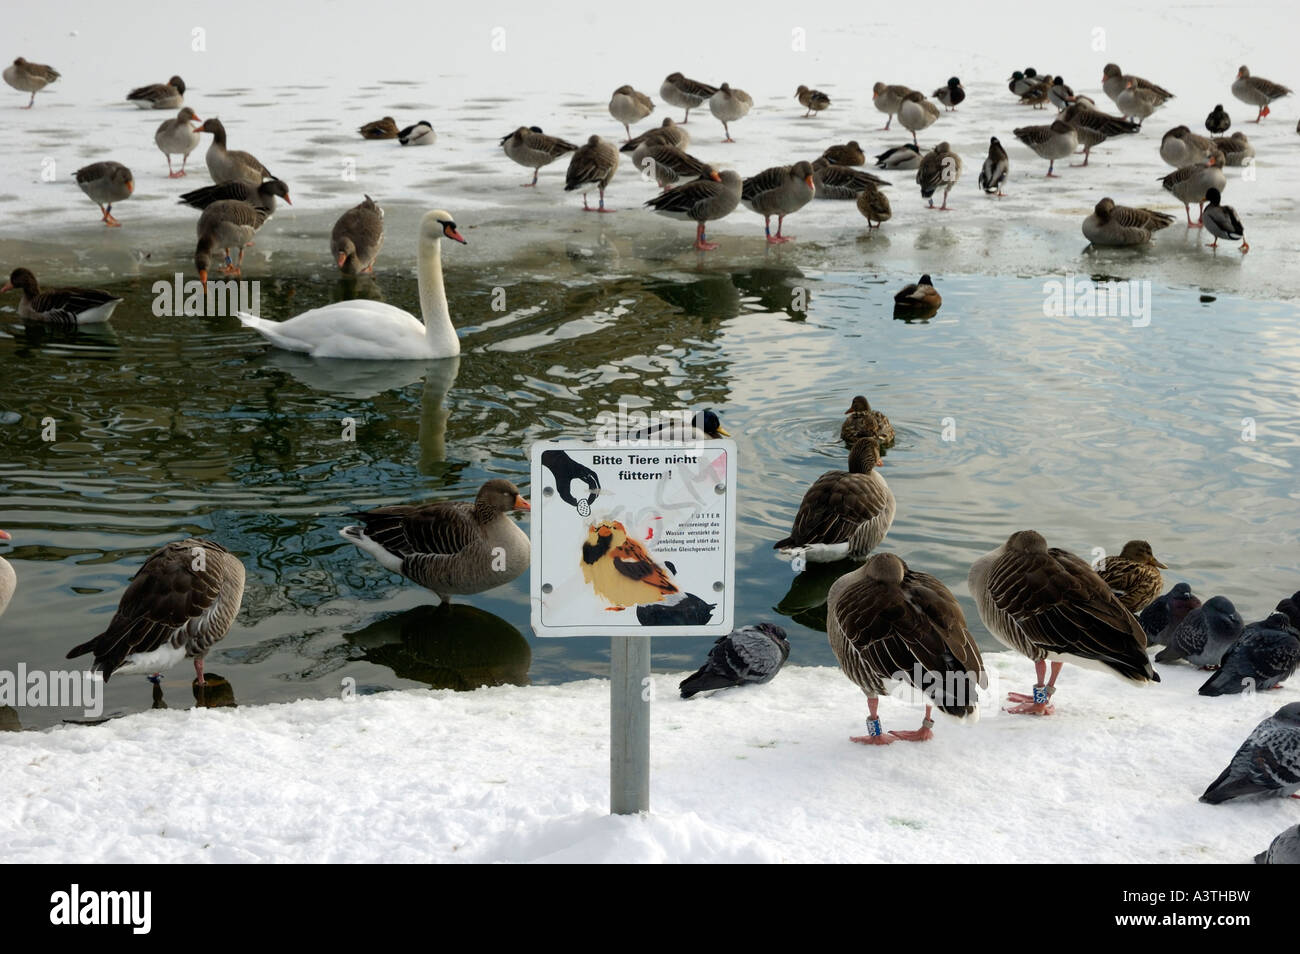 partially-frozen-sea-with-swan-and-ducks-a-german-sign-says-do-not